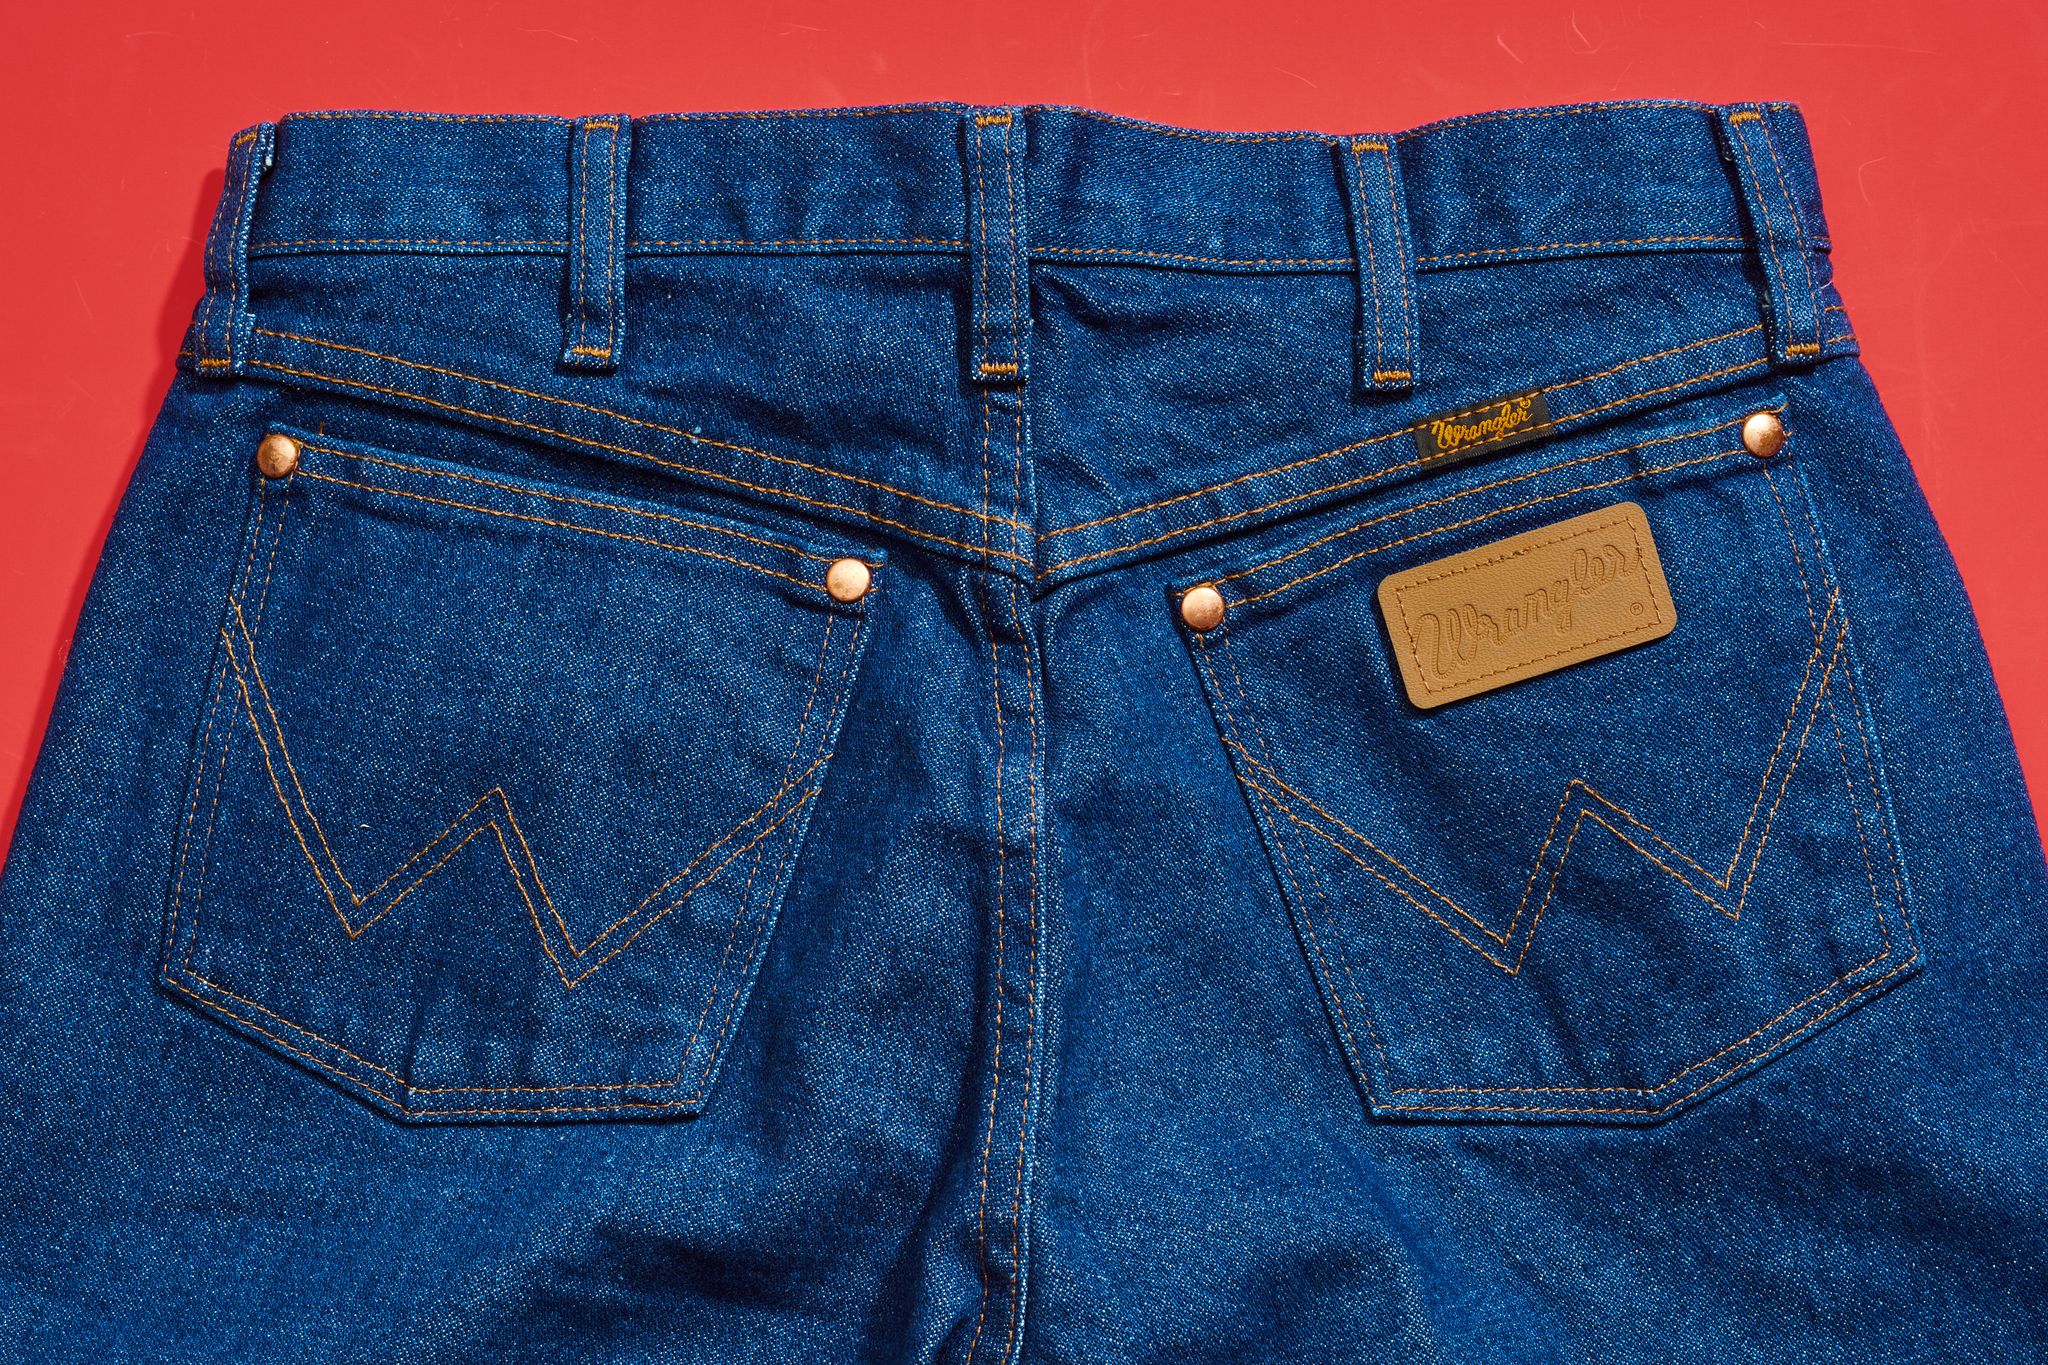 10 Low-Priced Pairs of Jeans with Style